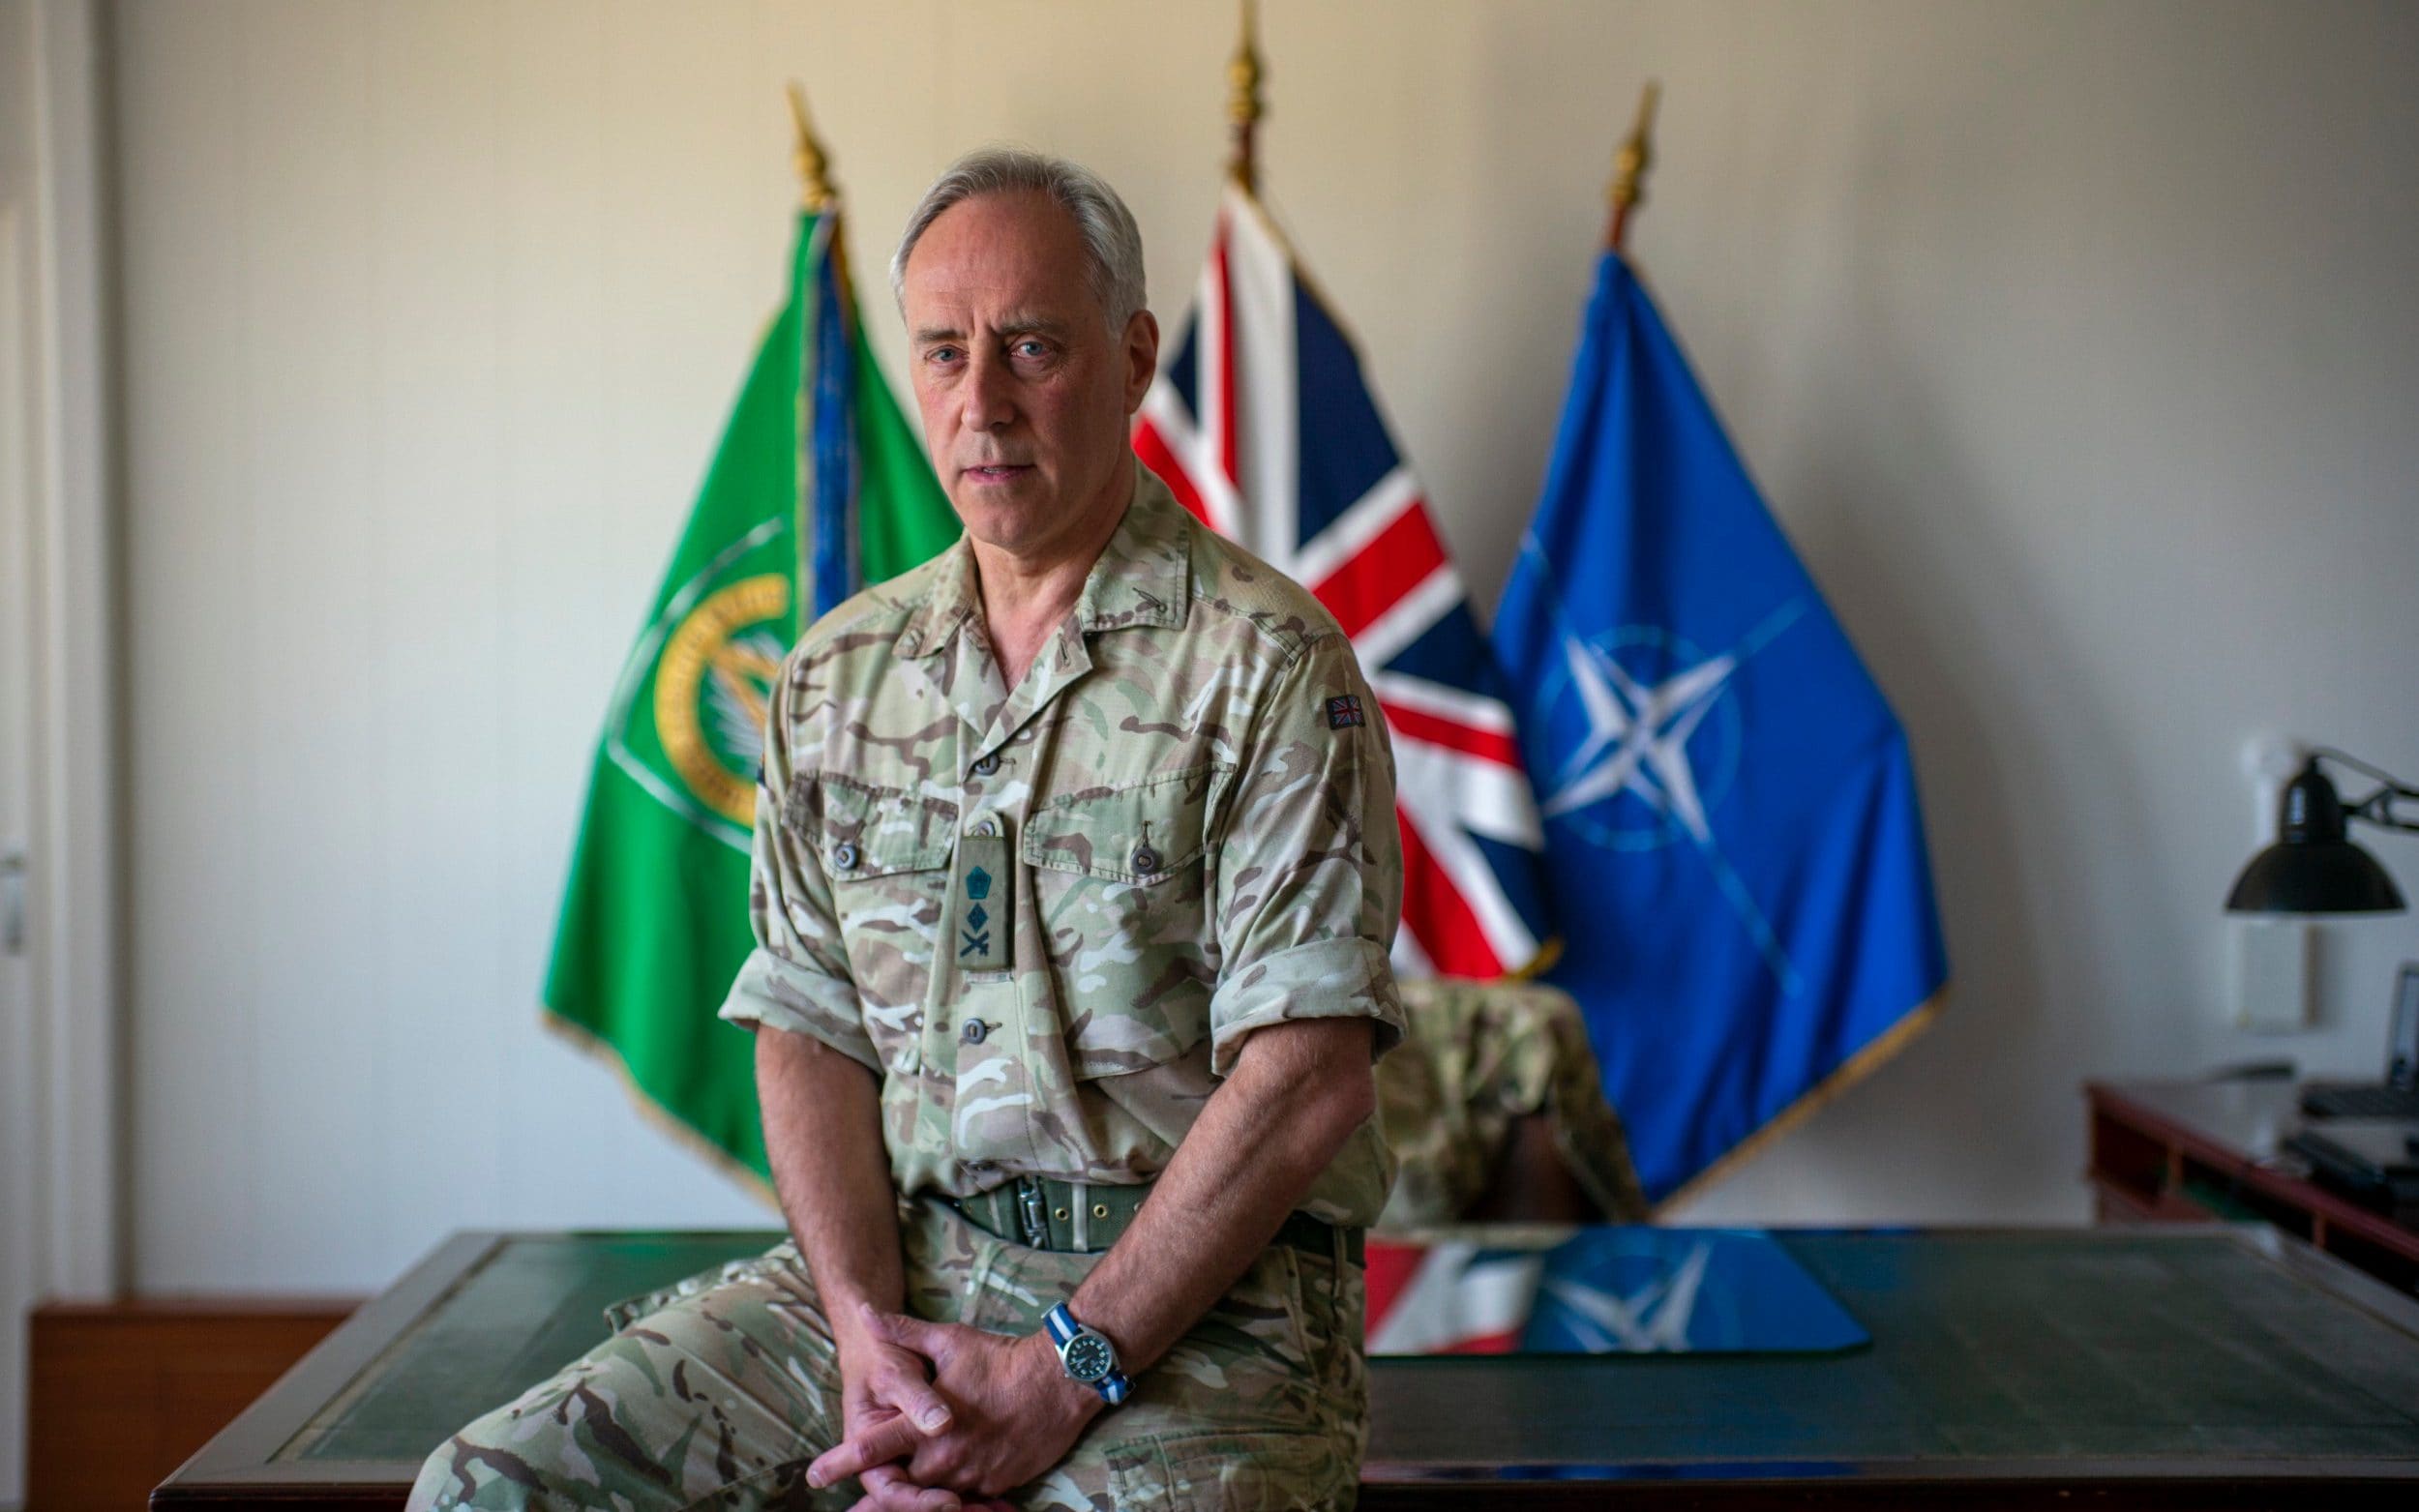 general banned from lobbying after leaving armed forces